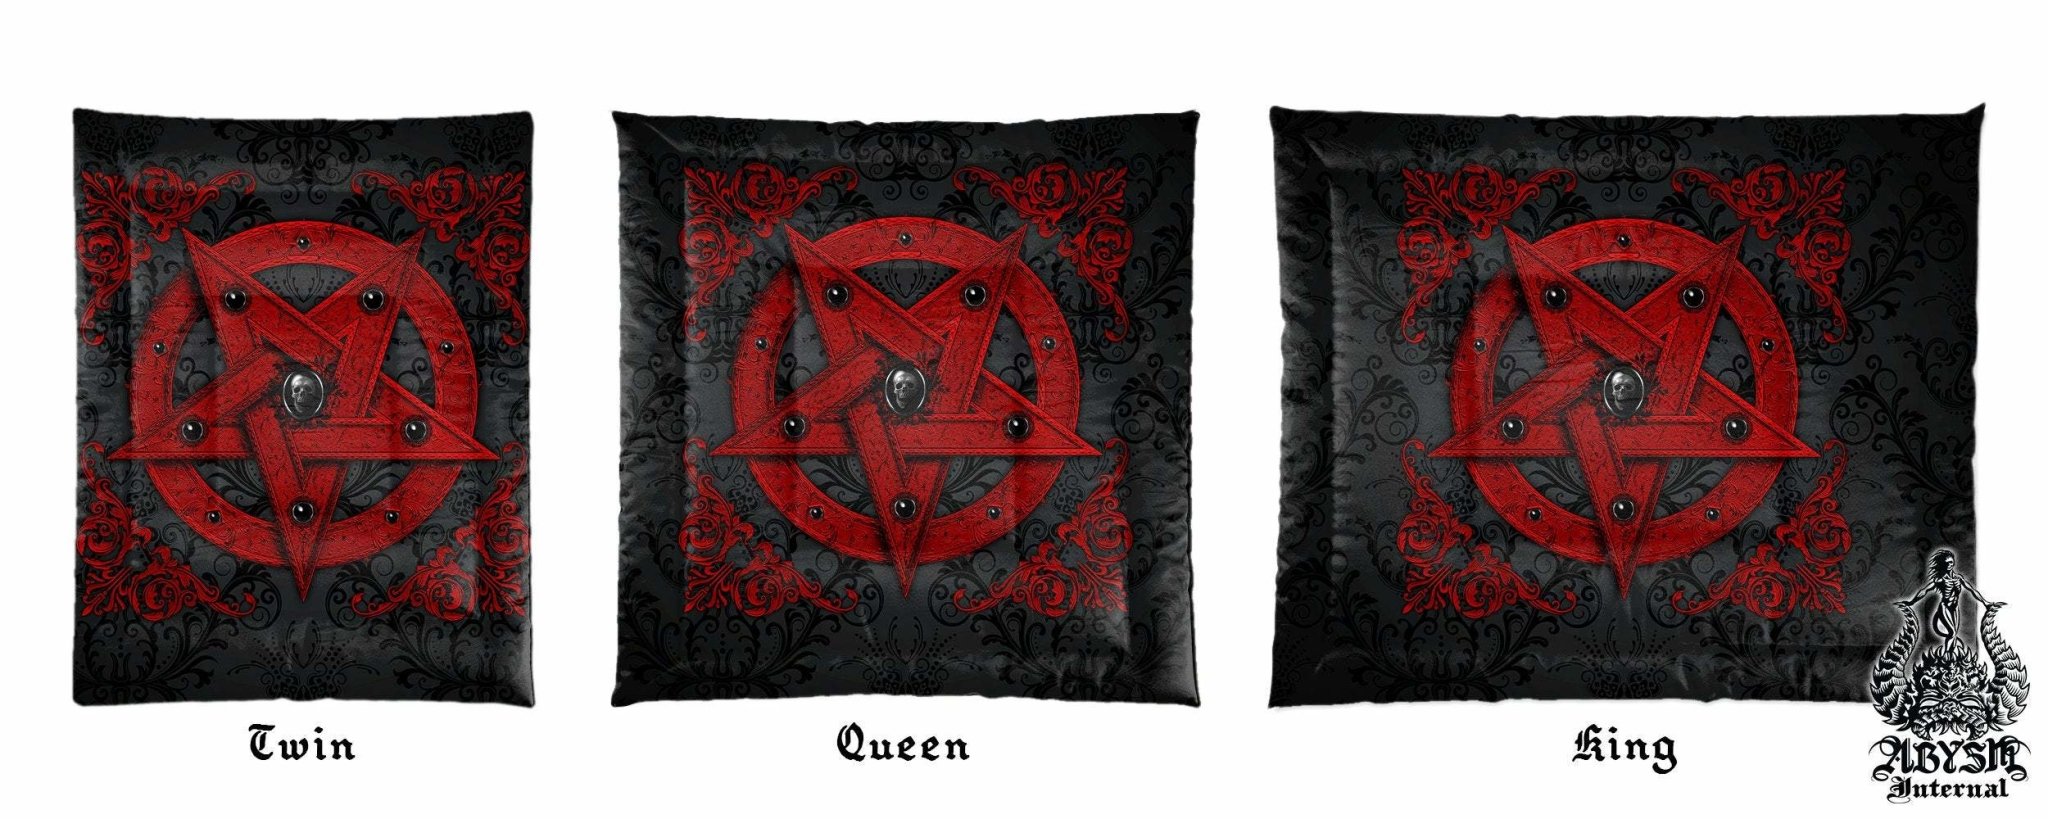 Red Pentagram Bedding Set, Comforter and Duvet, Alternative Bed Cover and Satanic Bedroom Decor, King, Queen and Twin Size - Skull Art - Abysm Internal